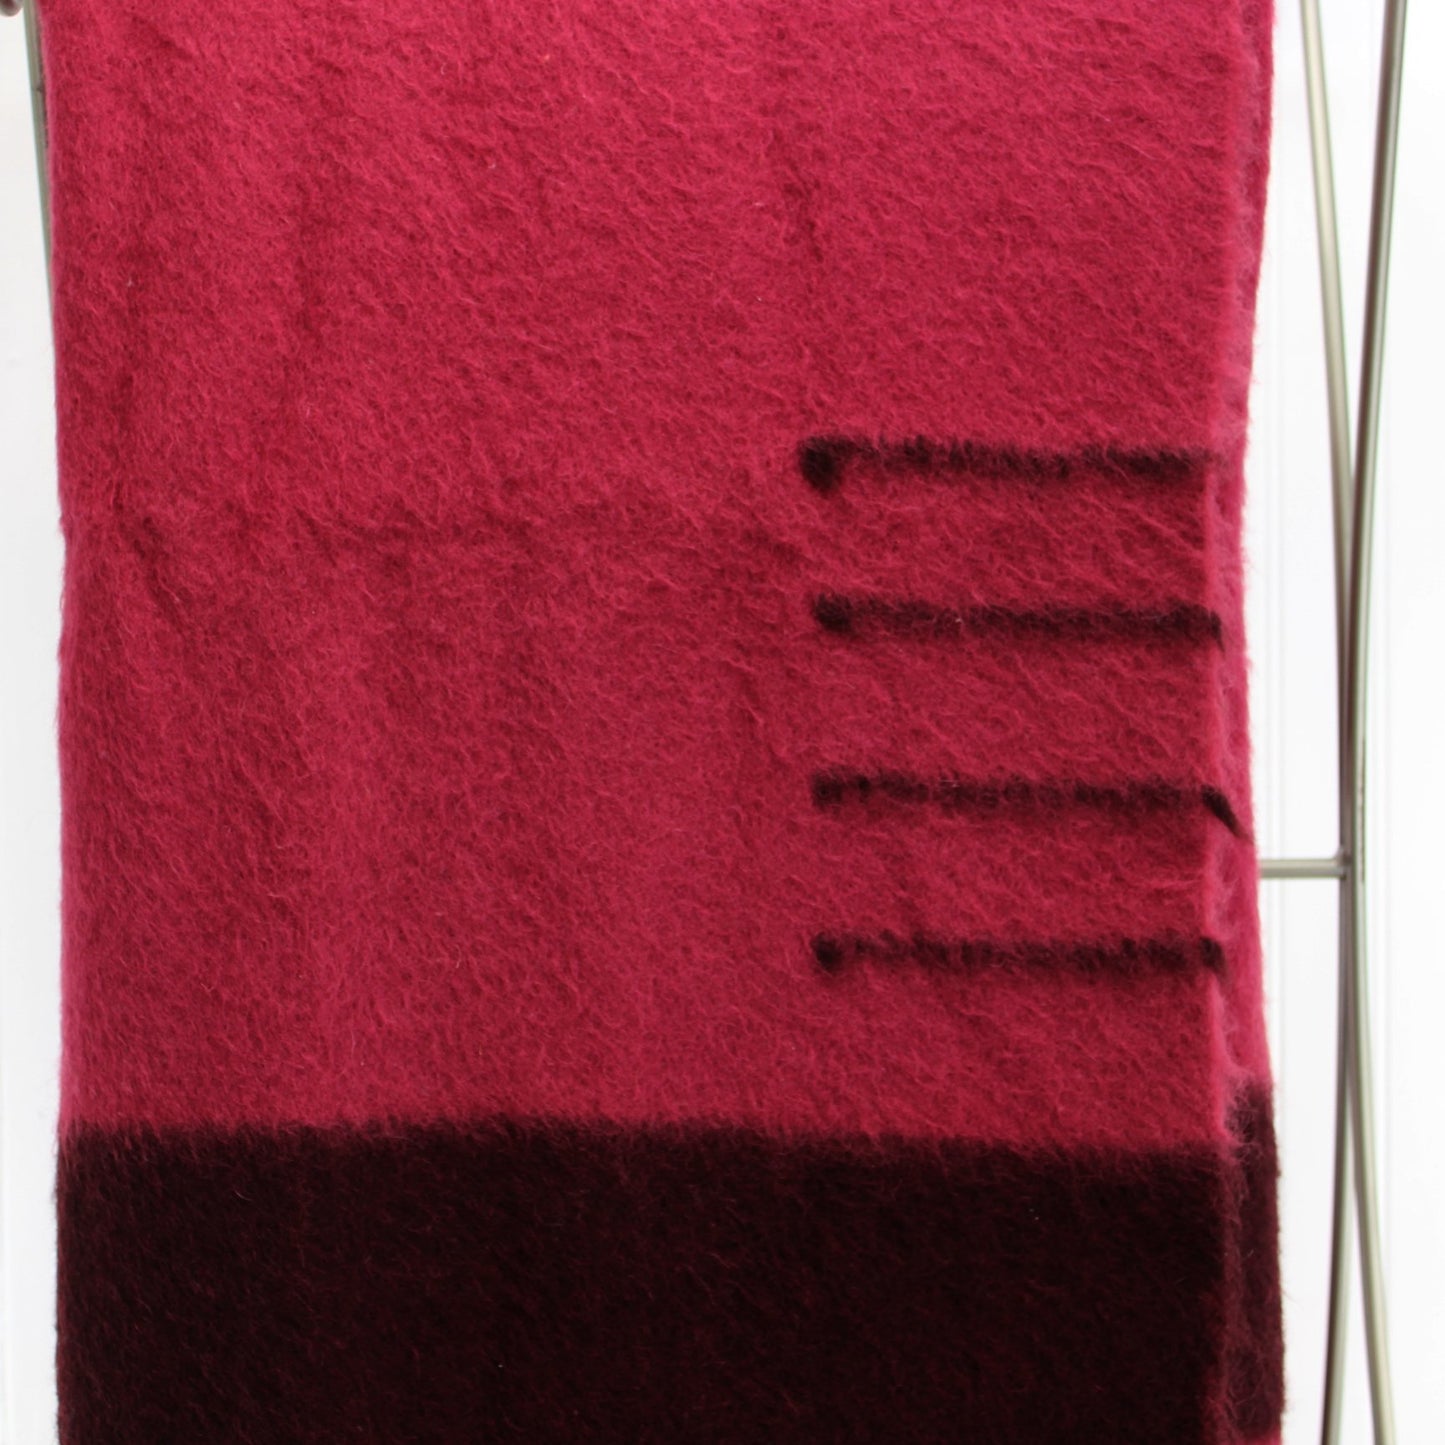 Rare Hudson Bay  Wool Blanket 4 Point Cranberry  69" X 91" Weight 6# Excellent closeup view wool